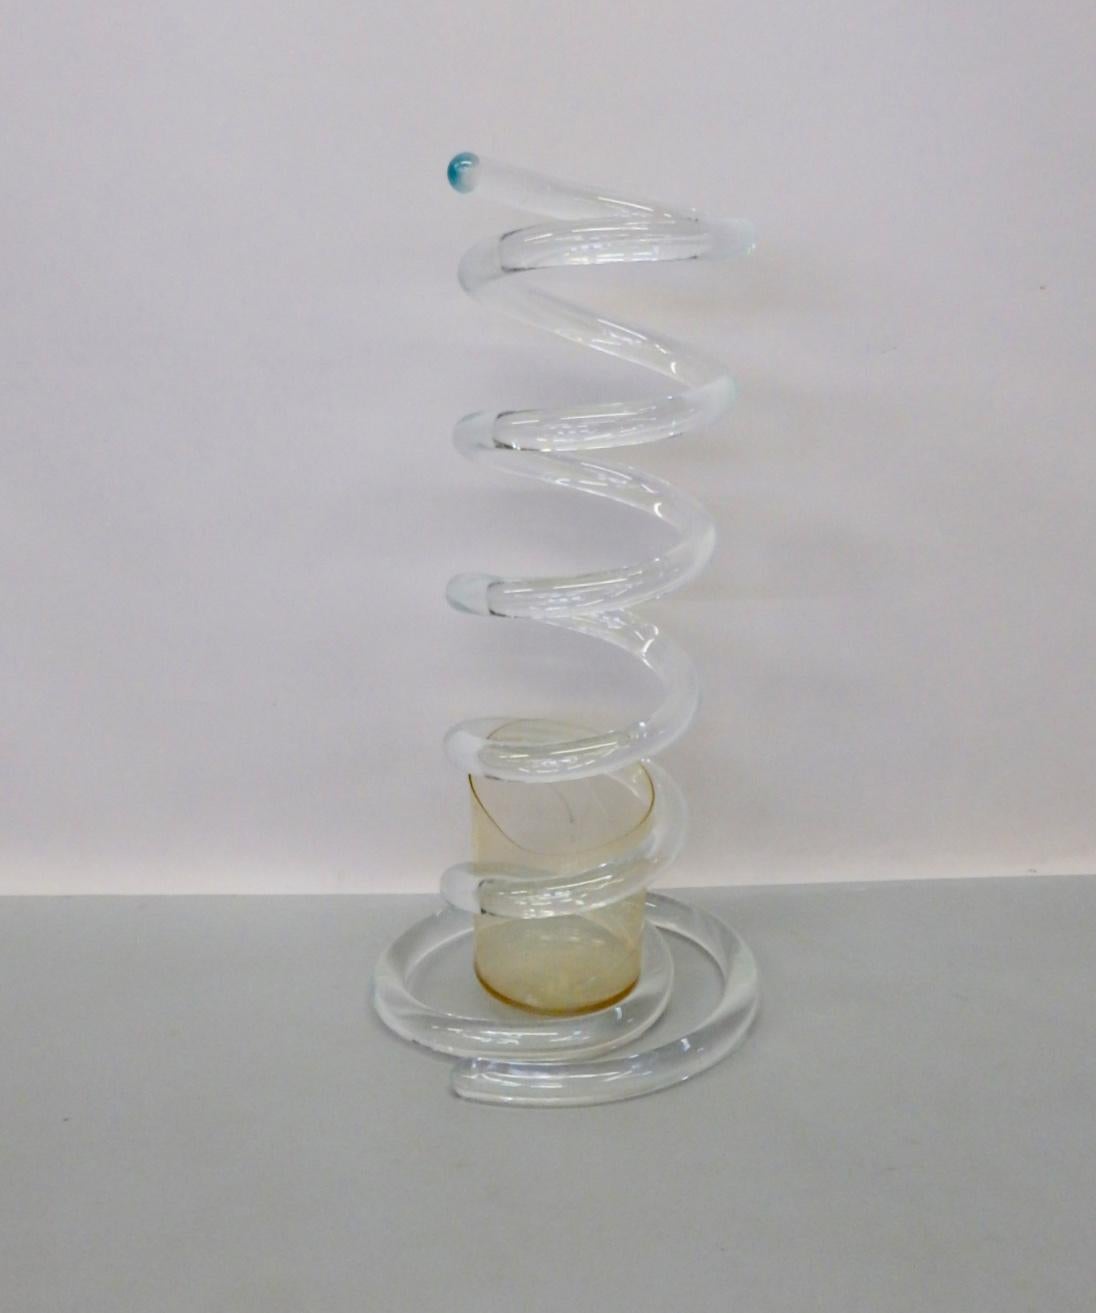 American Spring Wound Lucite Umbrella Stand Attributed to Dorothy Thorpe